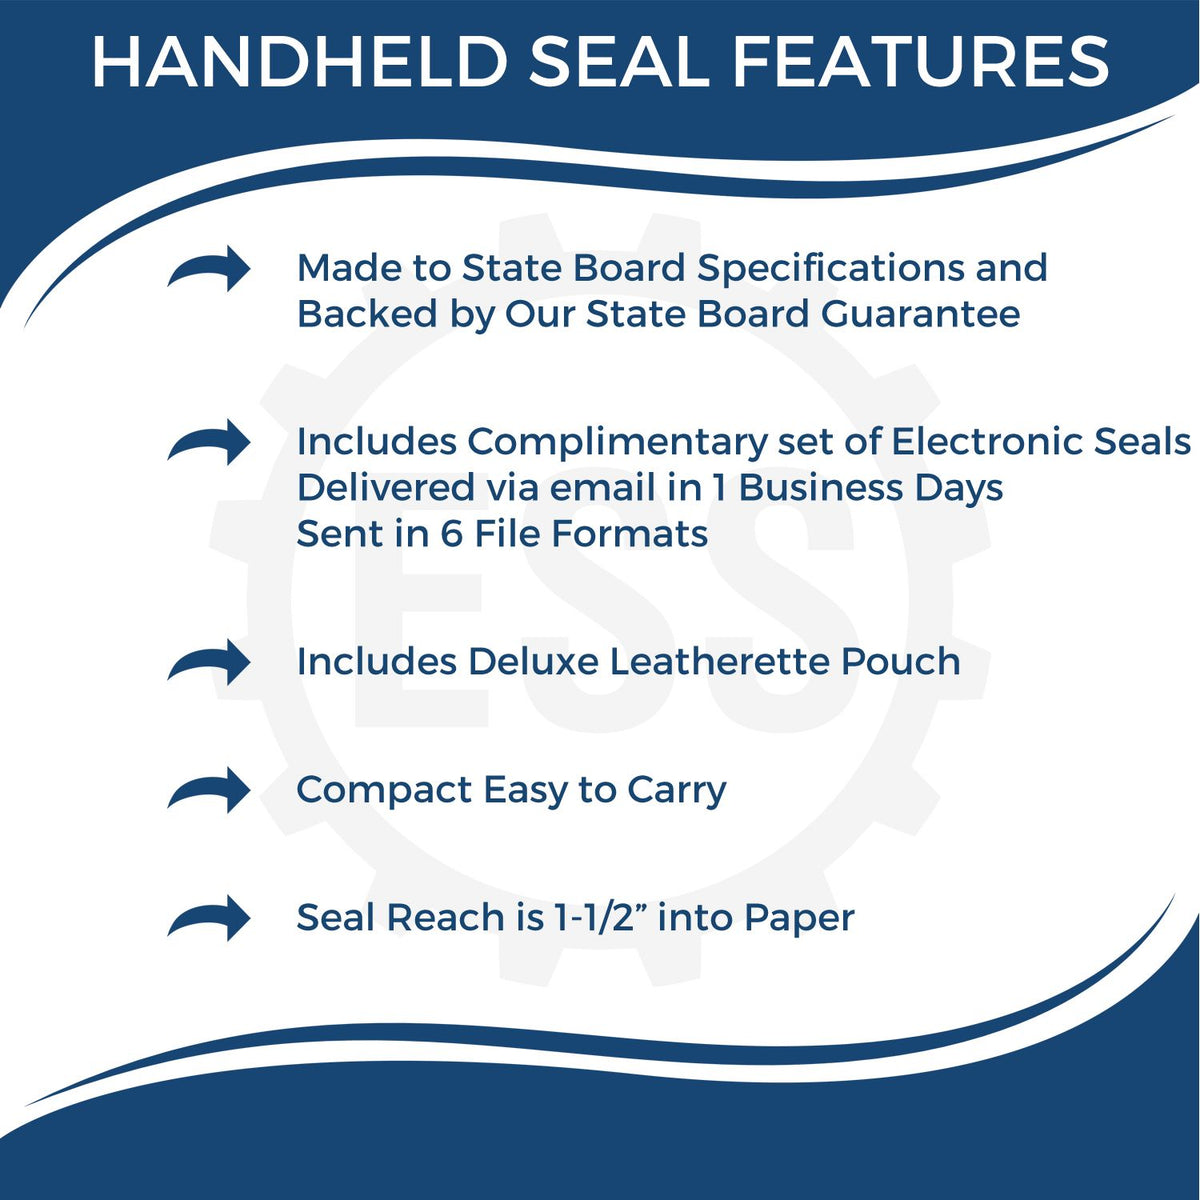 A picture of an infographic highlighting the selling points for the Handheld Missouri Land Surveyor Seal